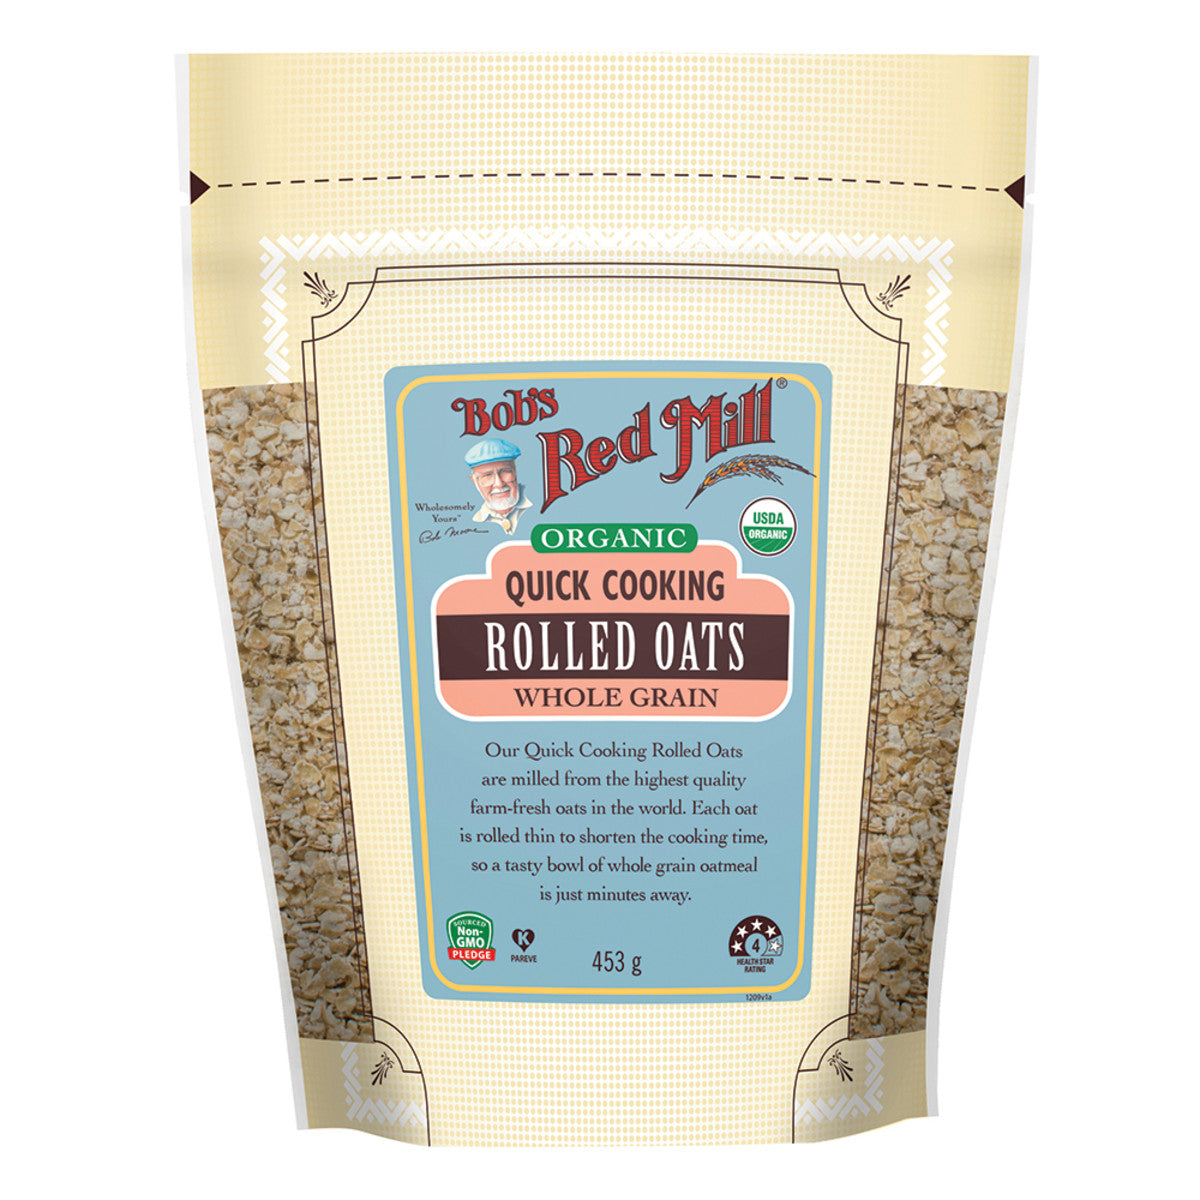 Bob's Red Mill - Organic Quick Cooking Rolled Oats